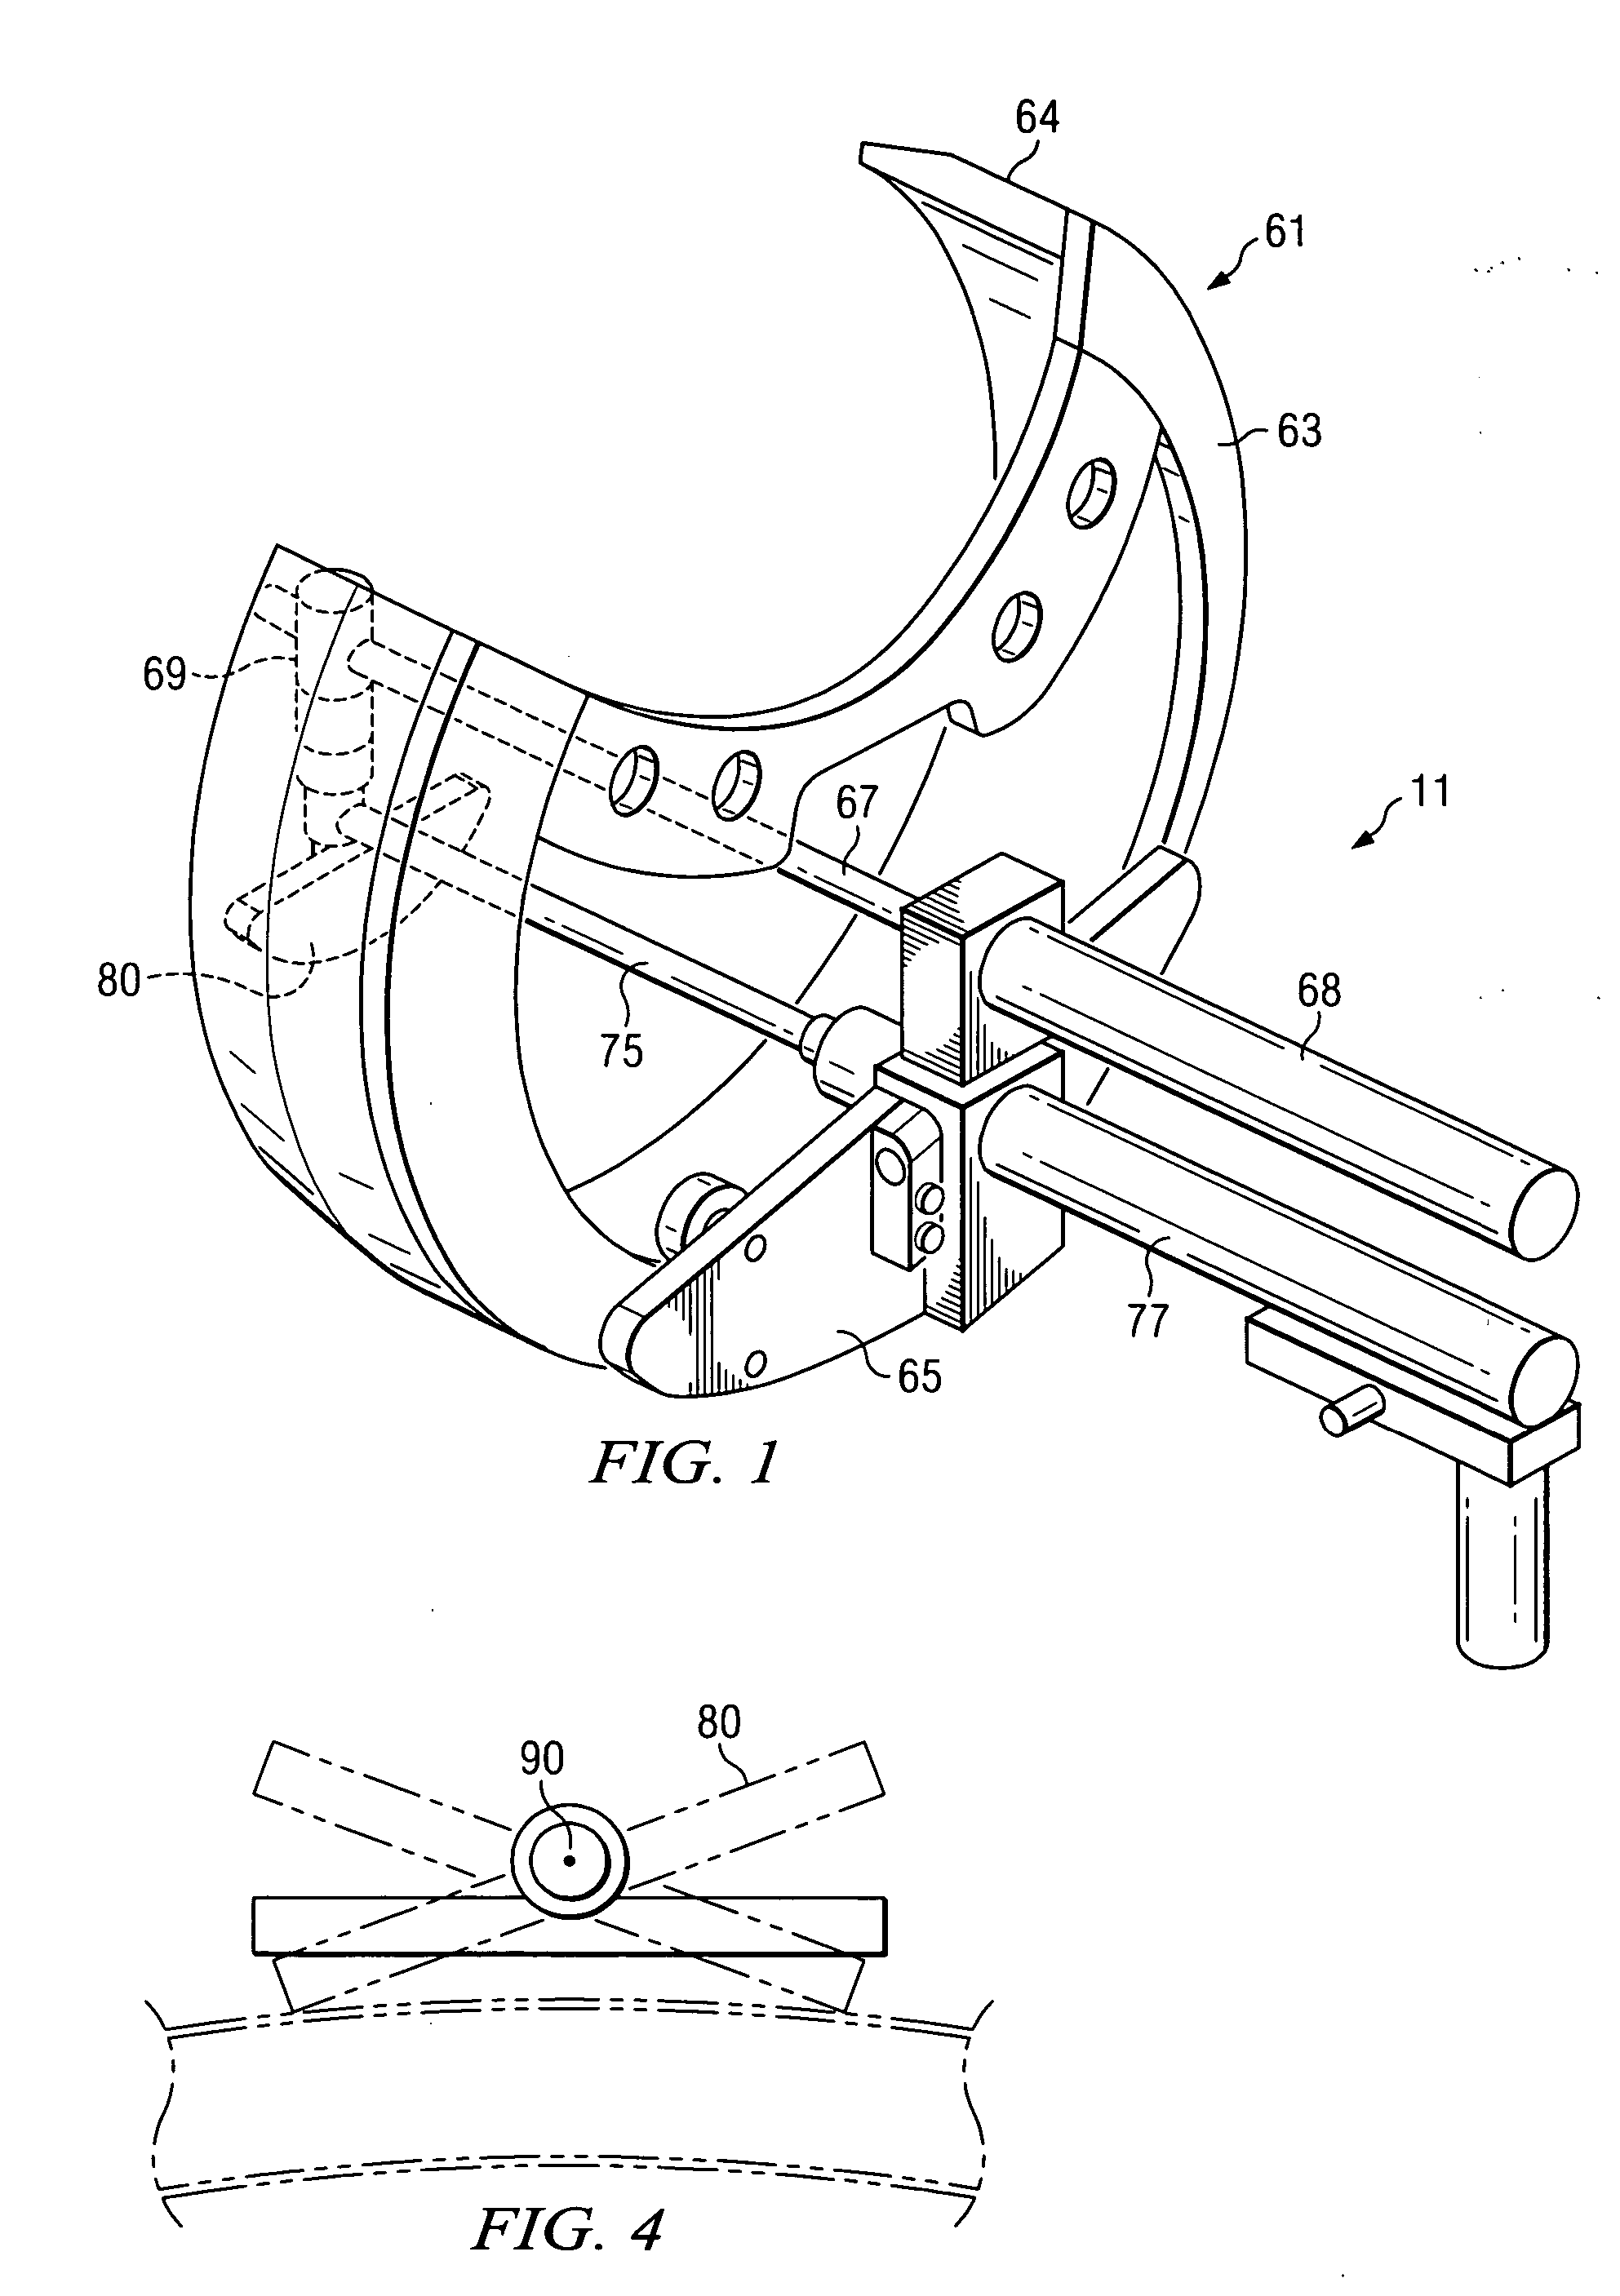 Snap in place gasket for sealing plastic pipelines and method of installation